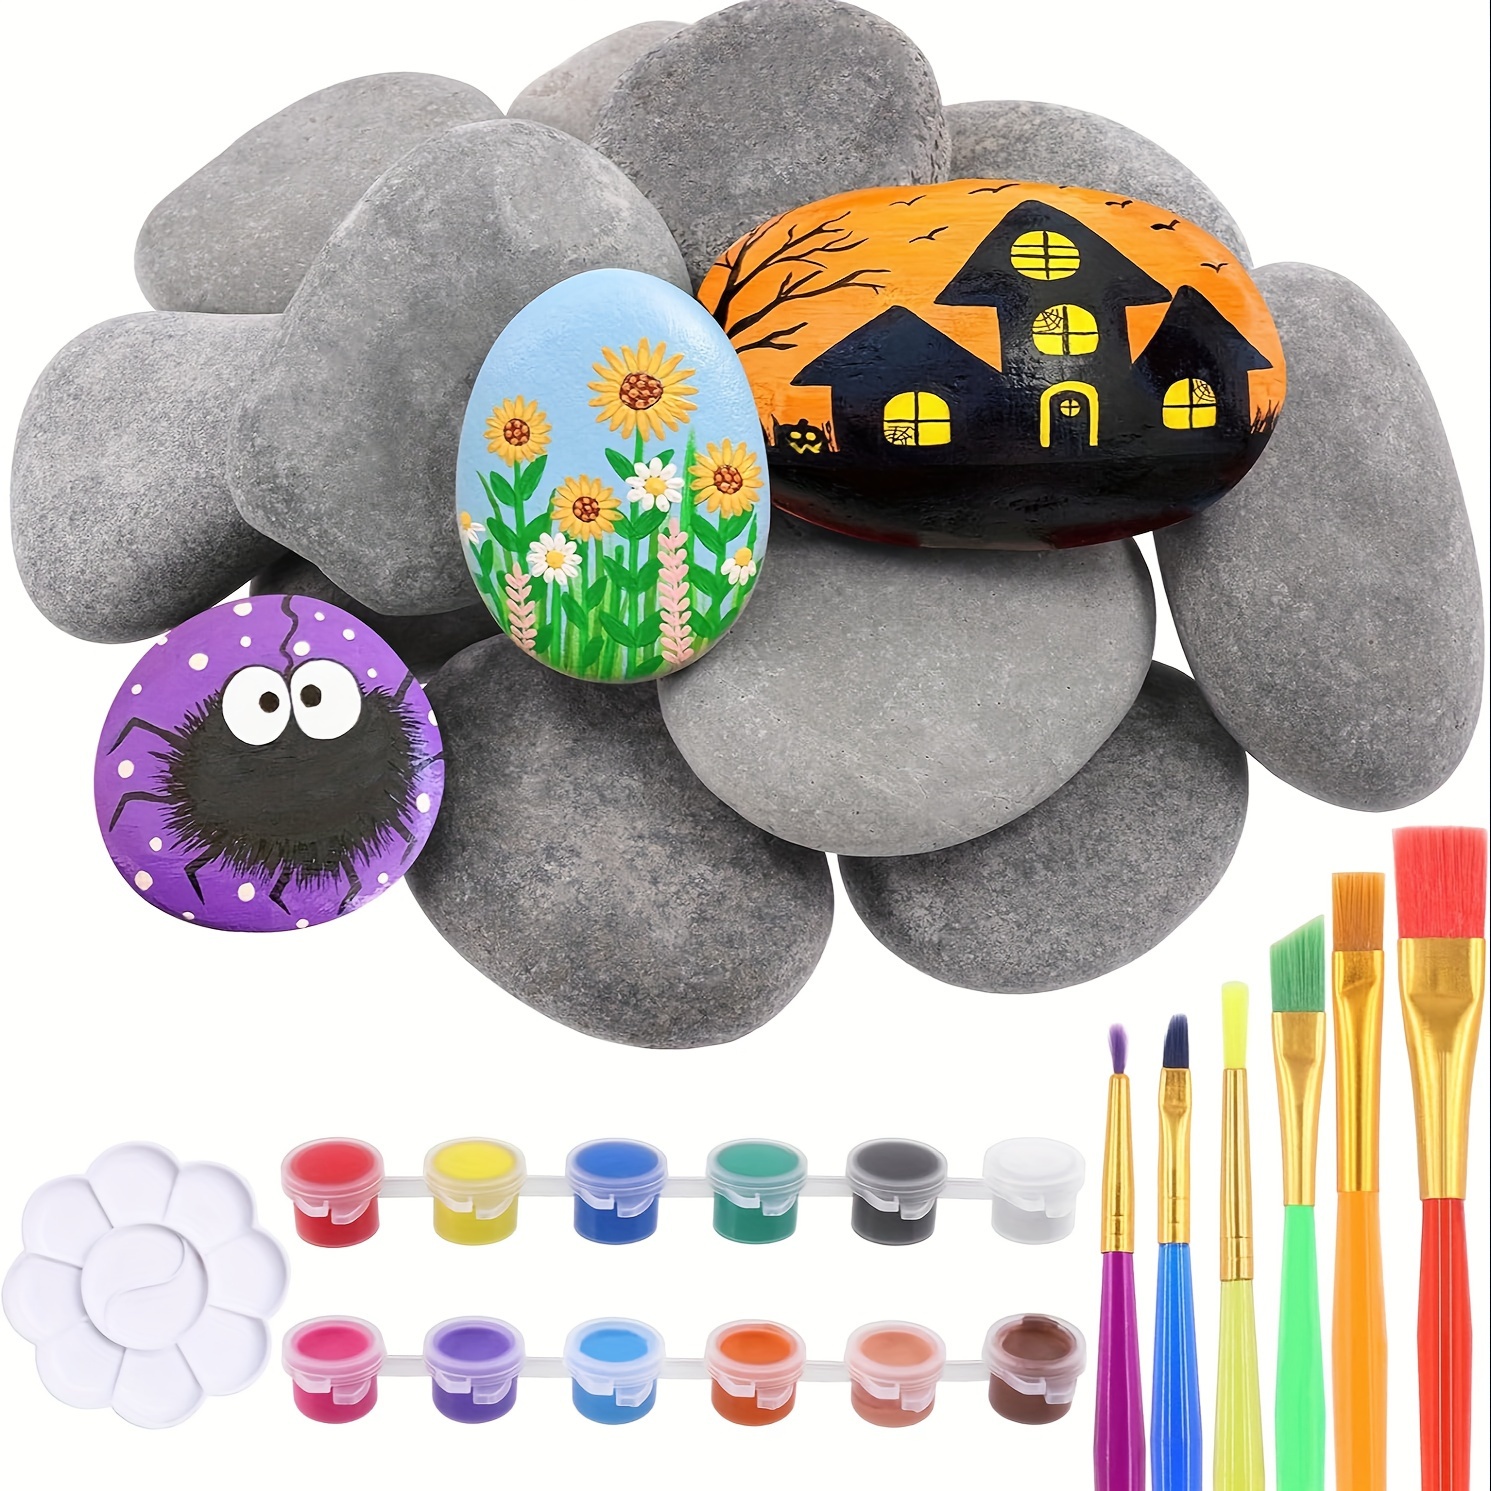 Acrylic Glitter Paint Rock Pebble Painting Coloring